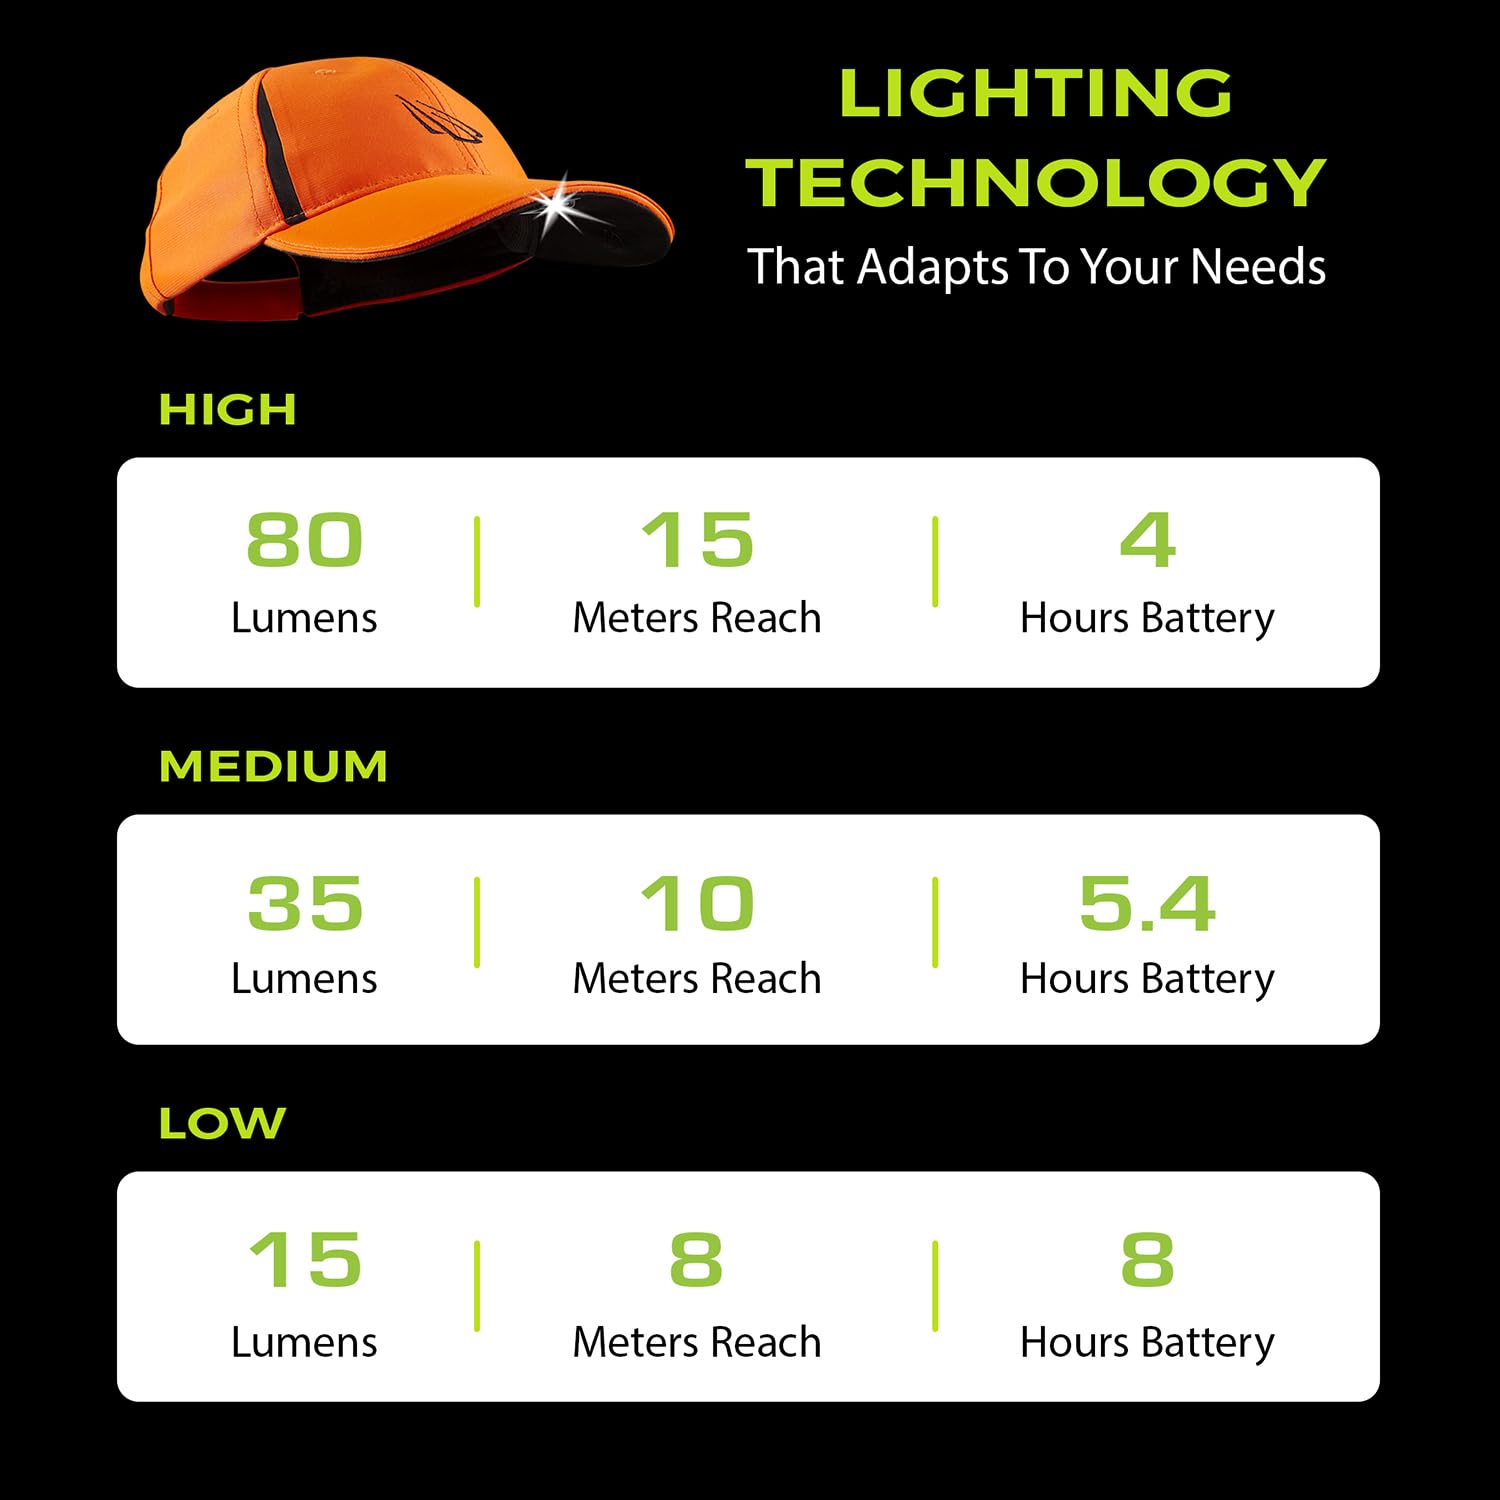 Panther Vision LED Hat Light - POWERCAP 3.0 USB Rechargeable Baseball Cap with Light Built in - LED Cap Visor Light with Bright Headlight and IPX4 Rating (Real Tree Edge)